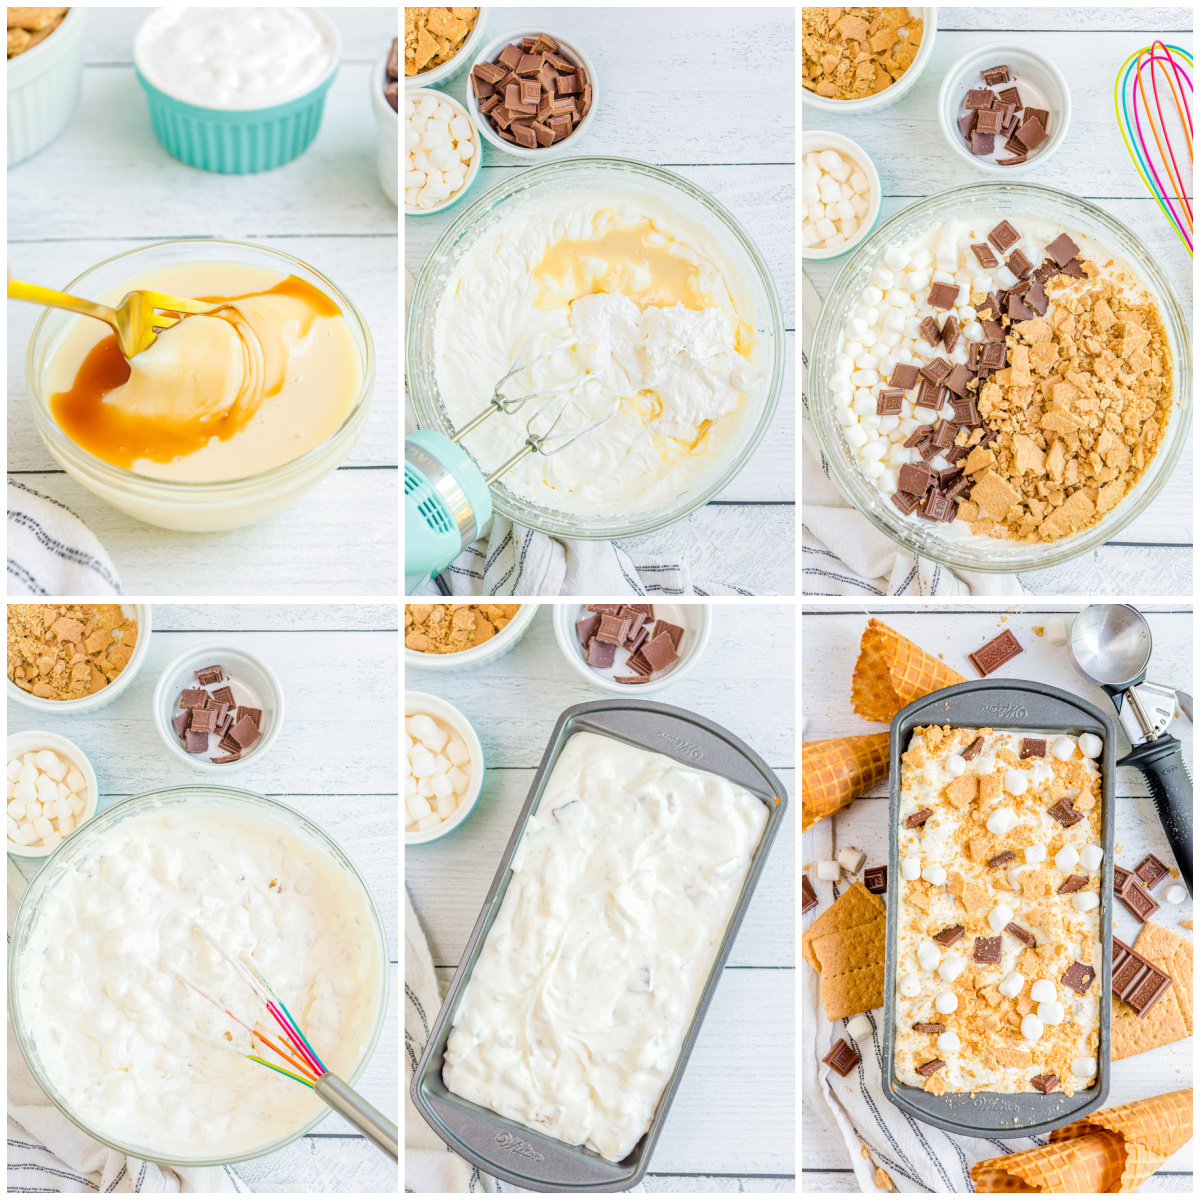 Step by step photos on how to make S'mores Ice Cream.